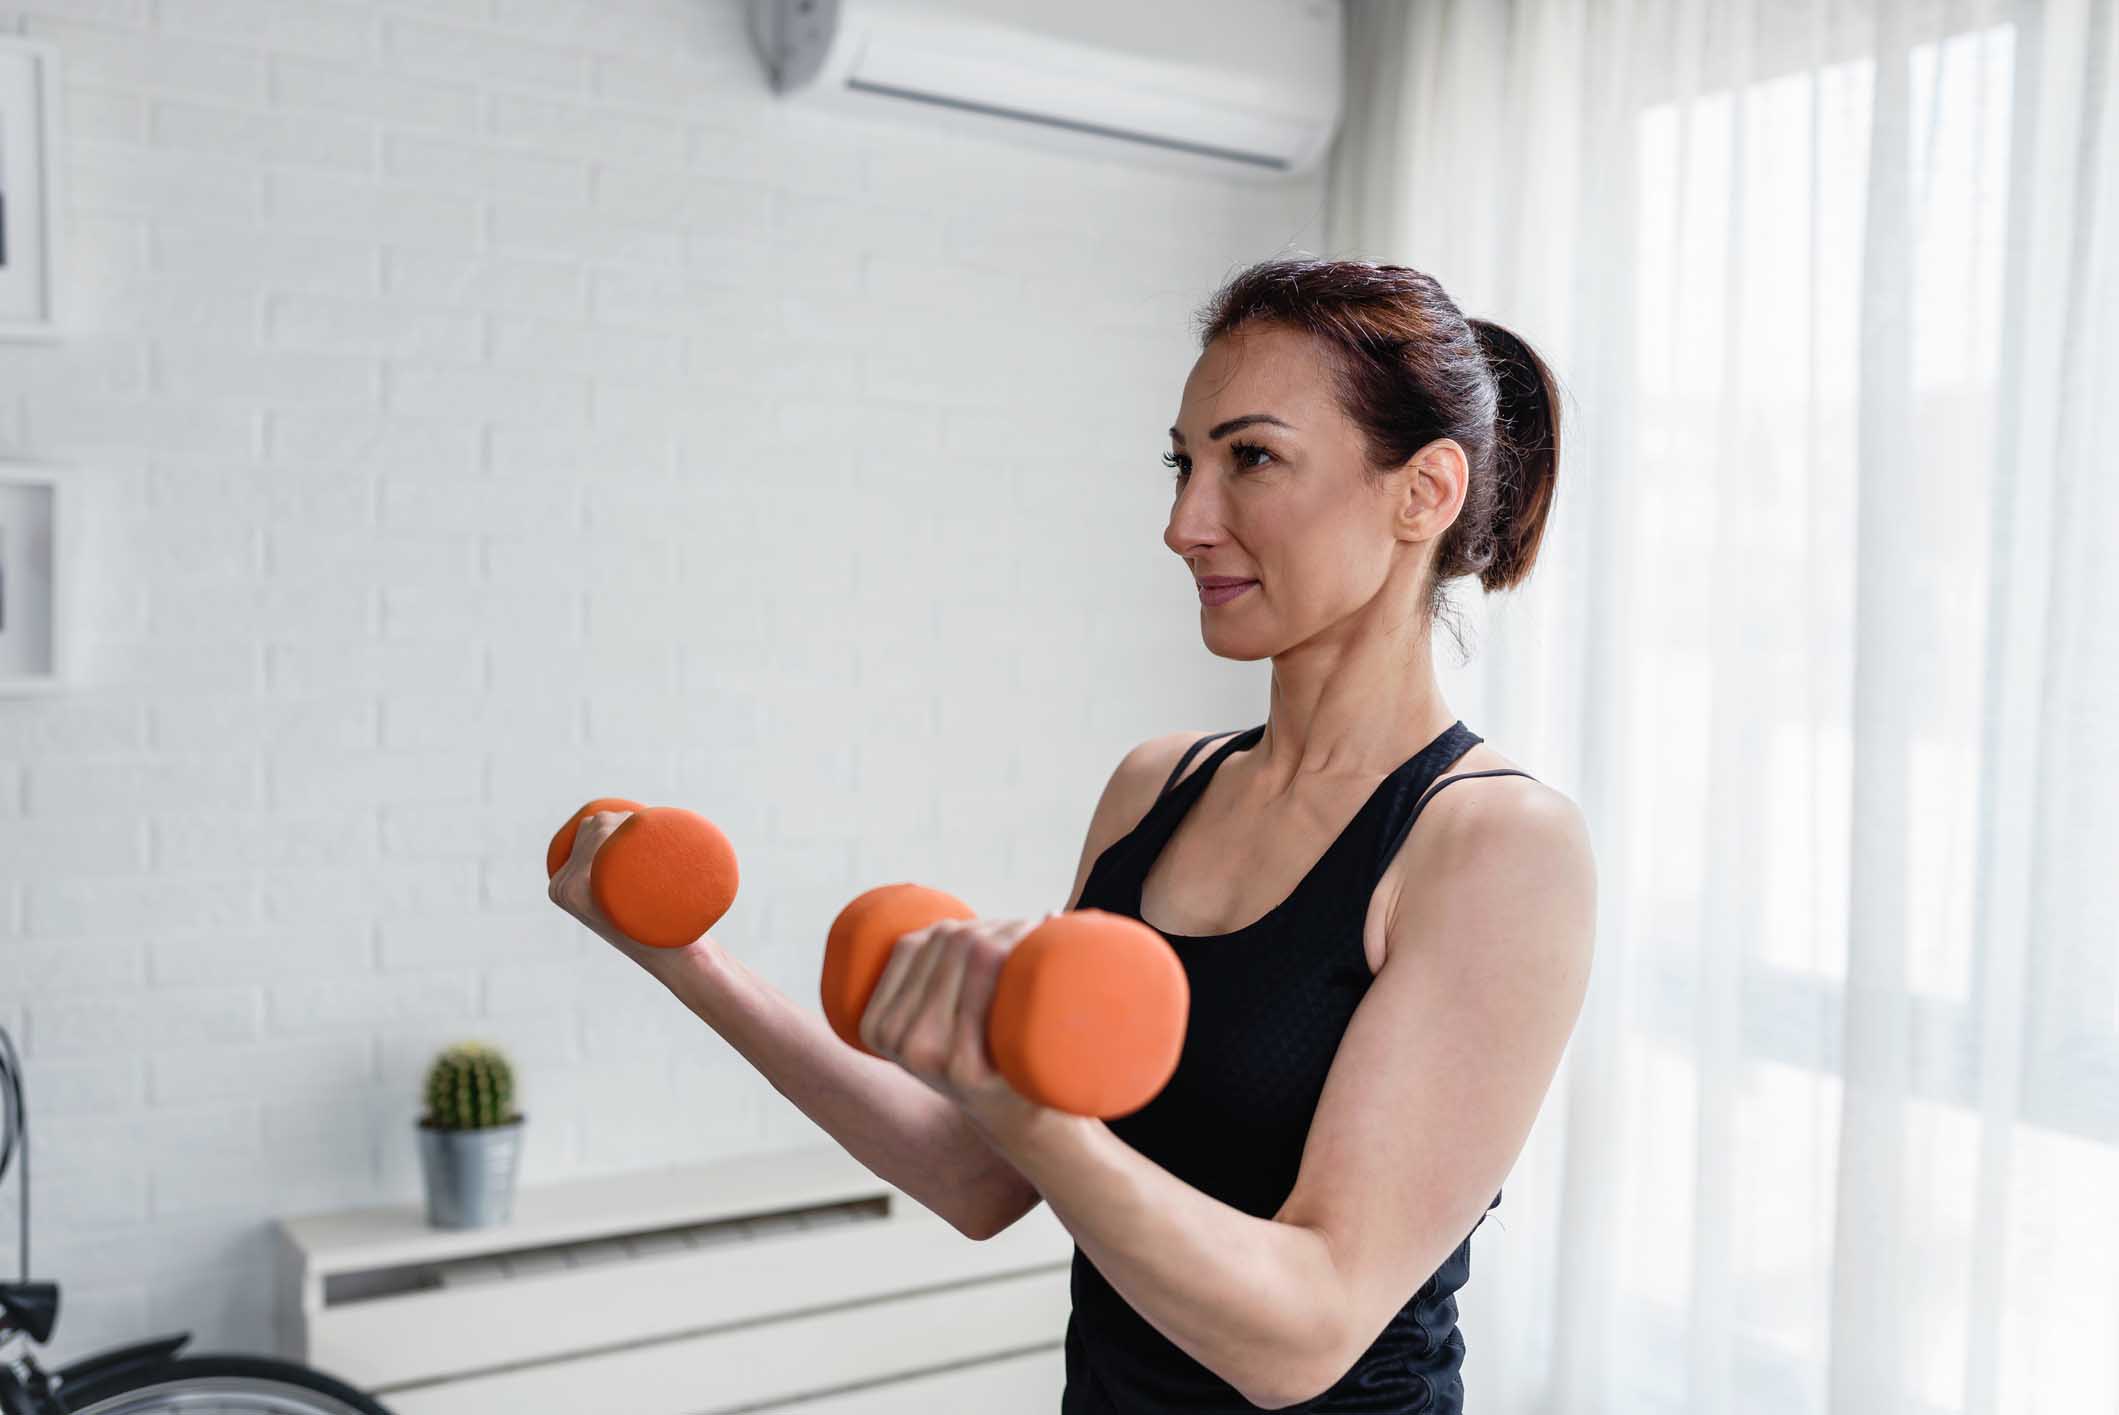 Over 40? Get Rid of Harmful Abdominal Fat With These 5 Critical Exercises  